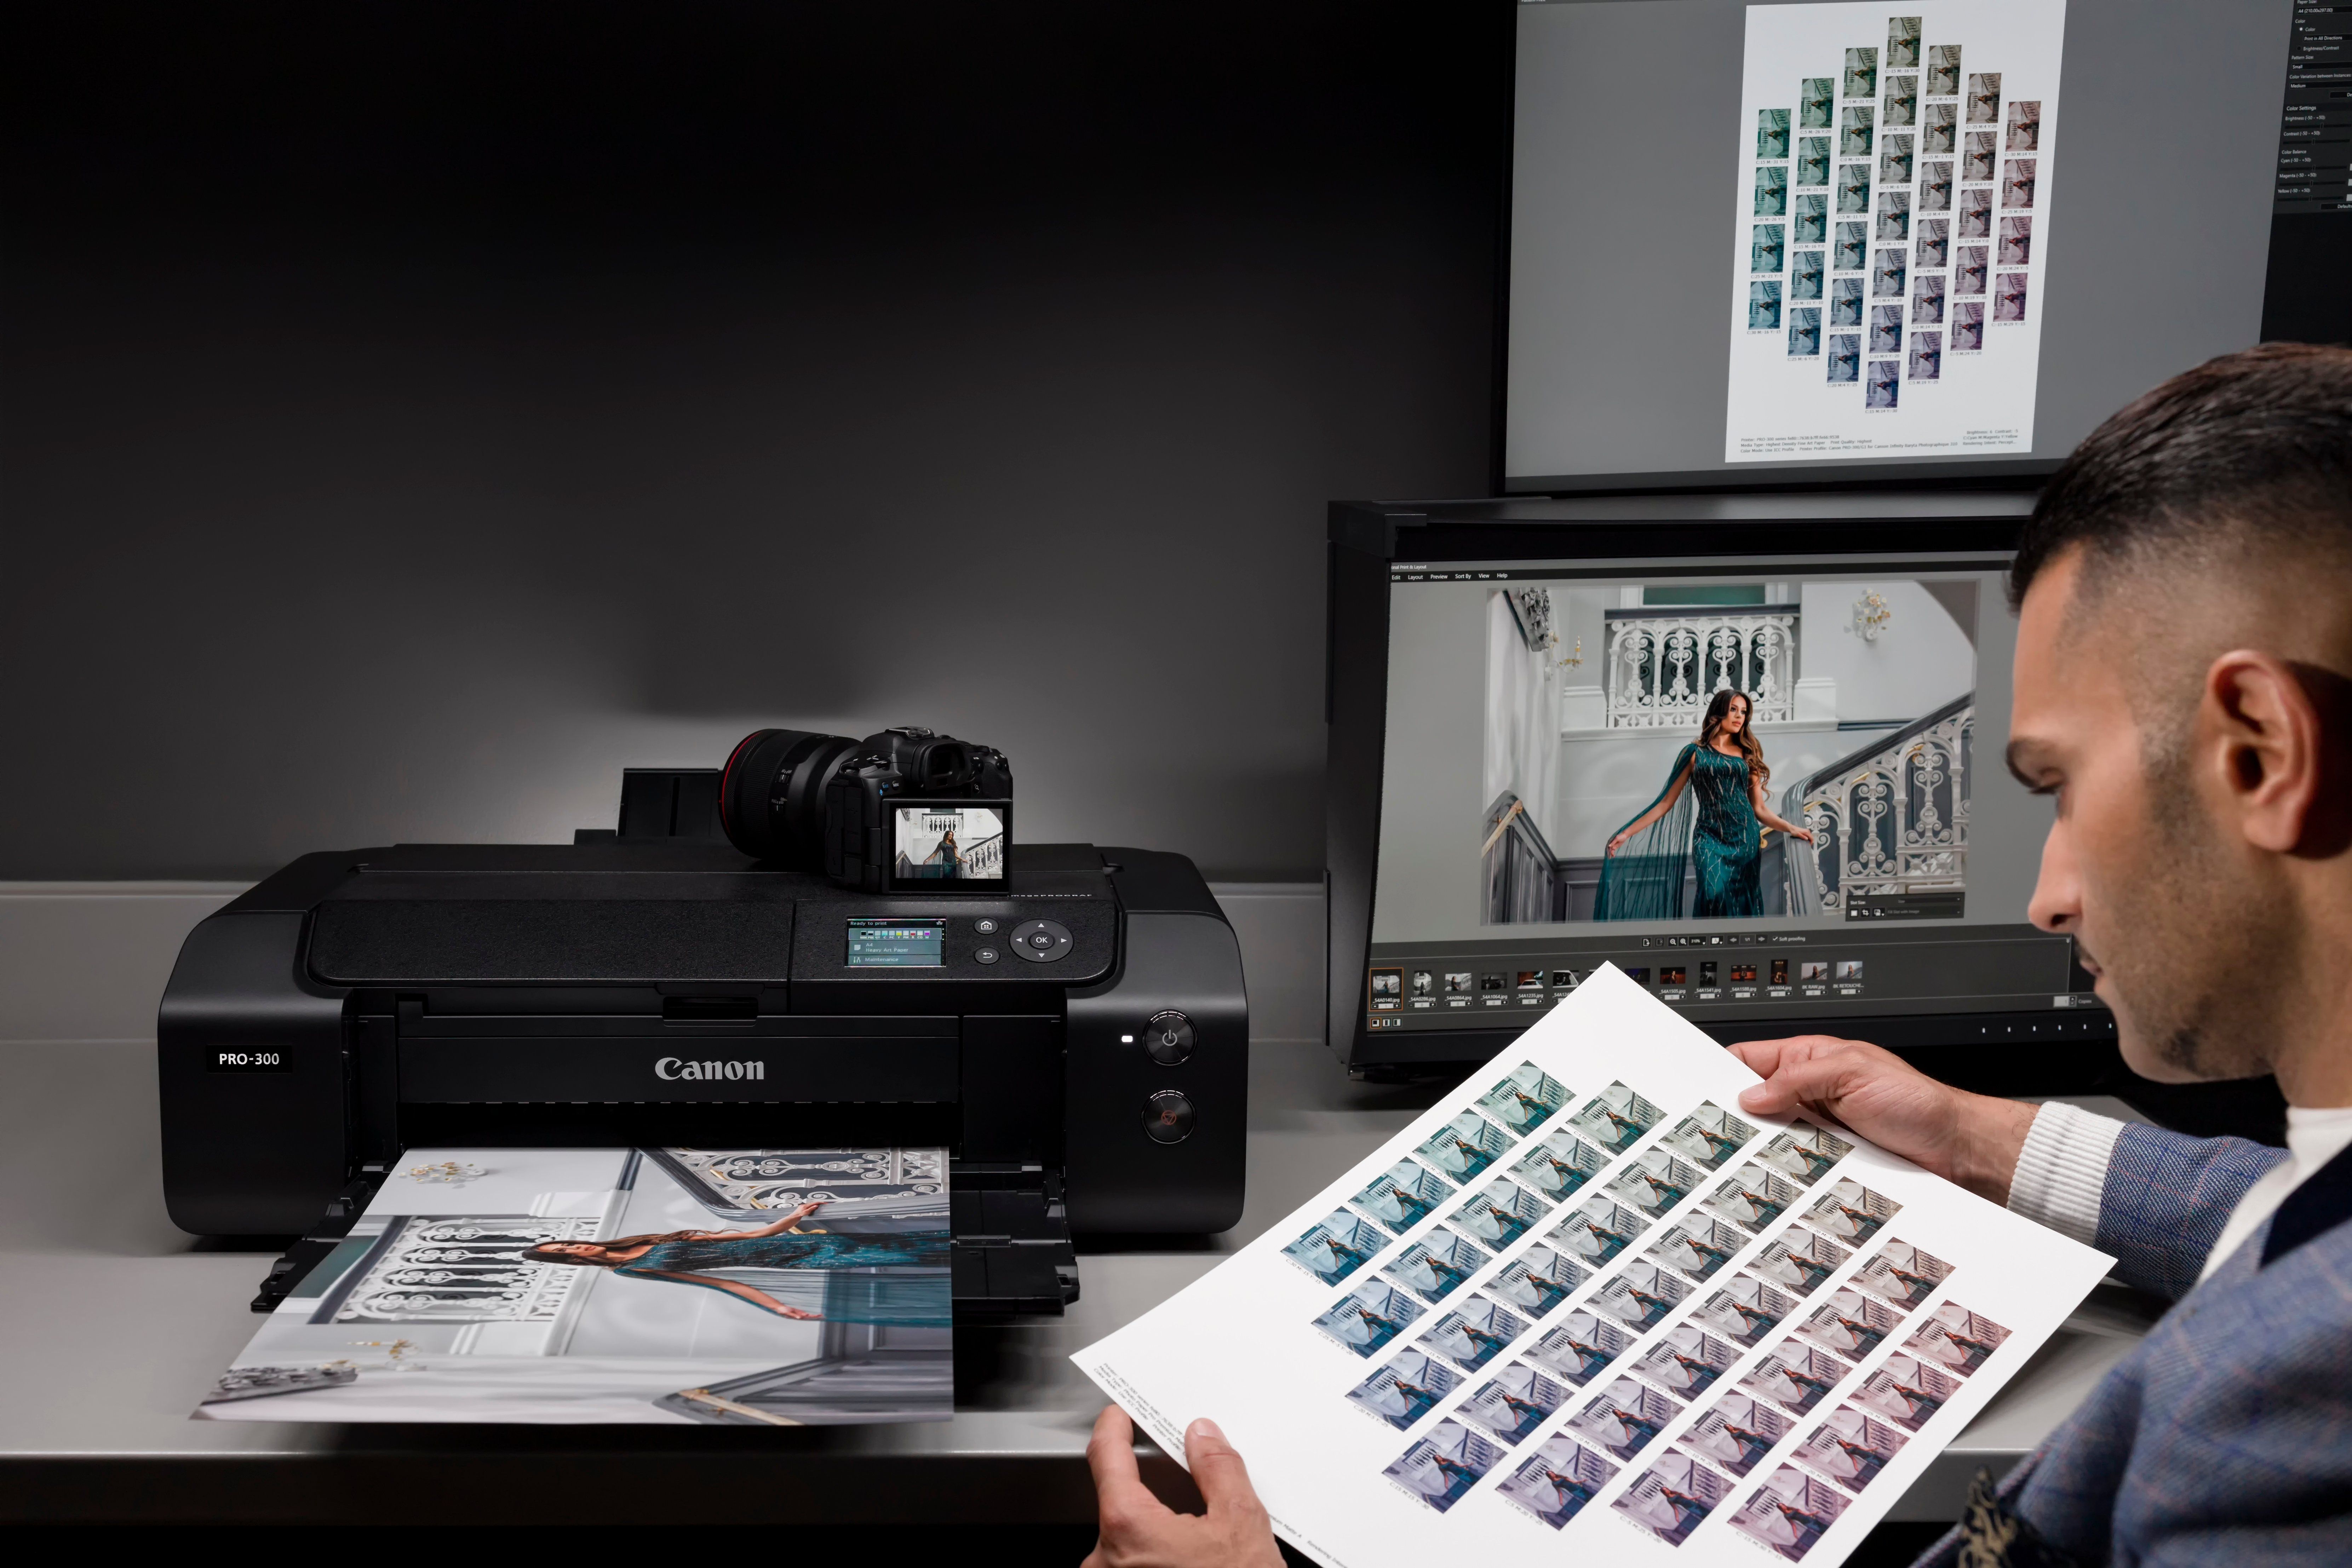 Introducing the Canon imagePROGRAF PRO-300